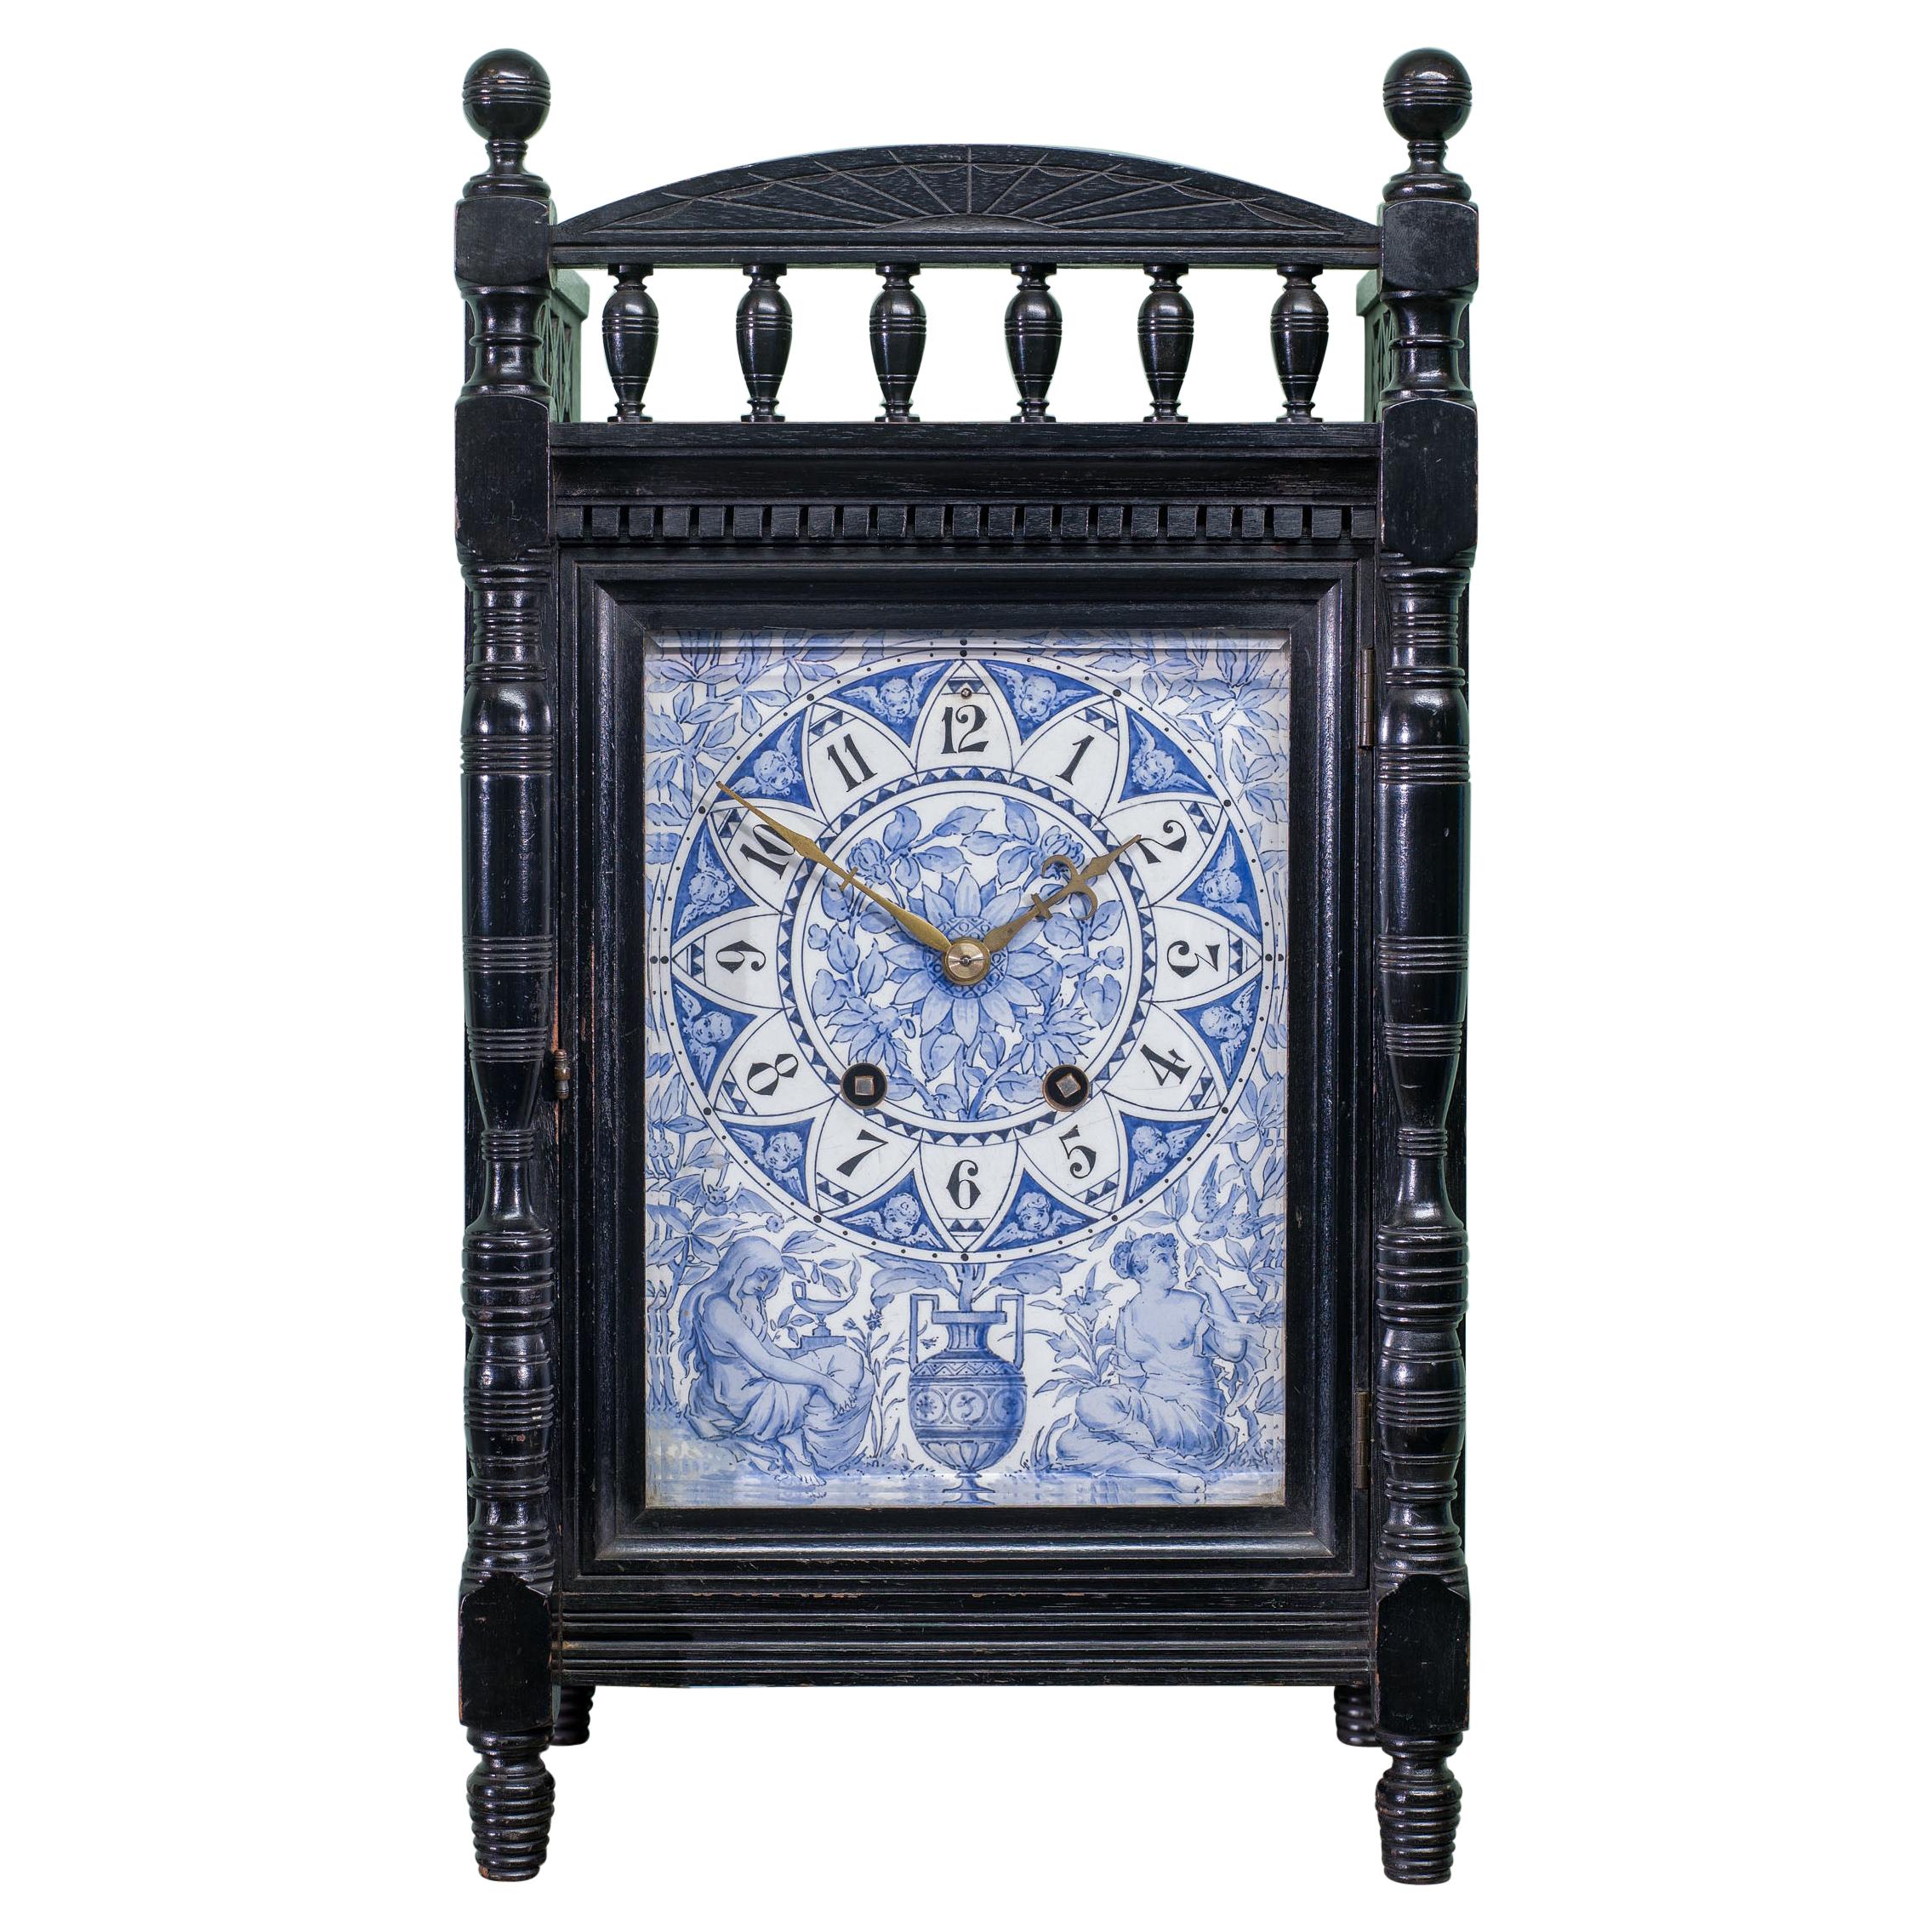 Aesthetic Movement Ebonised Mantel Clock Attributed to Lewis Foreman Day For Sale